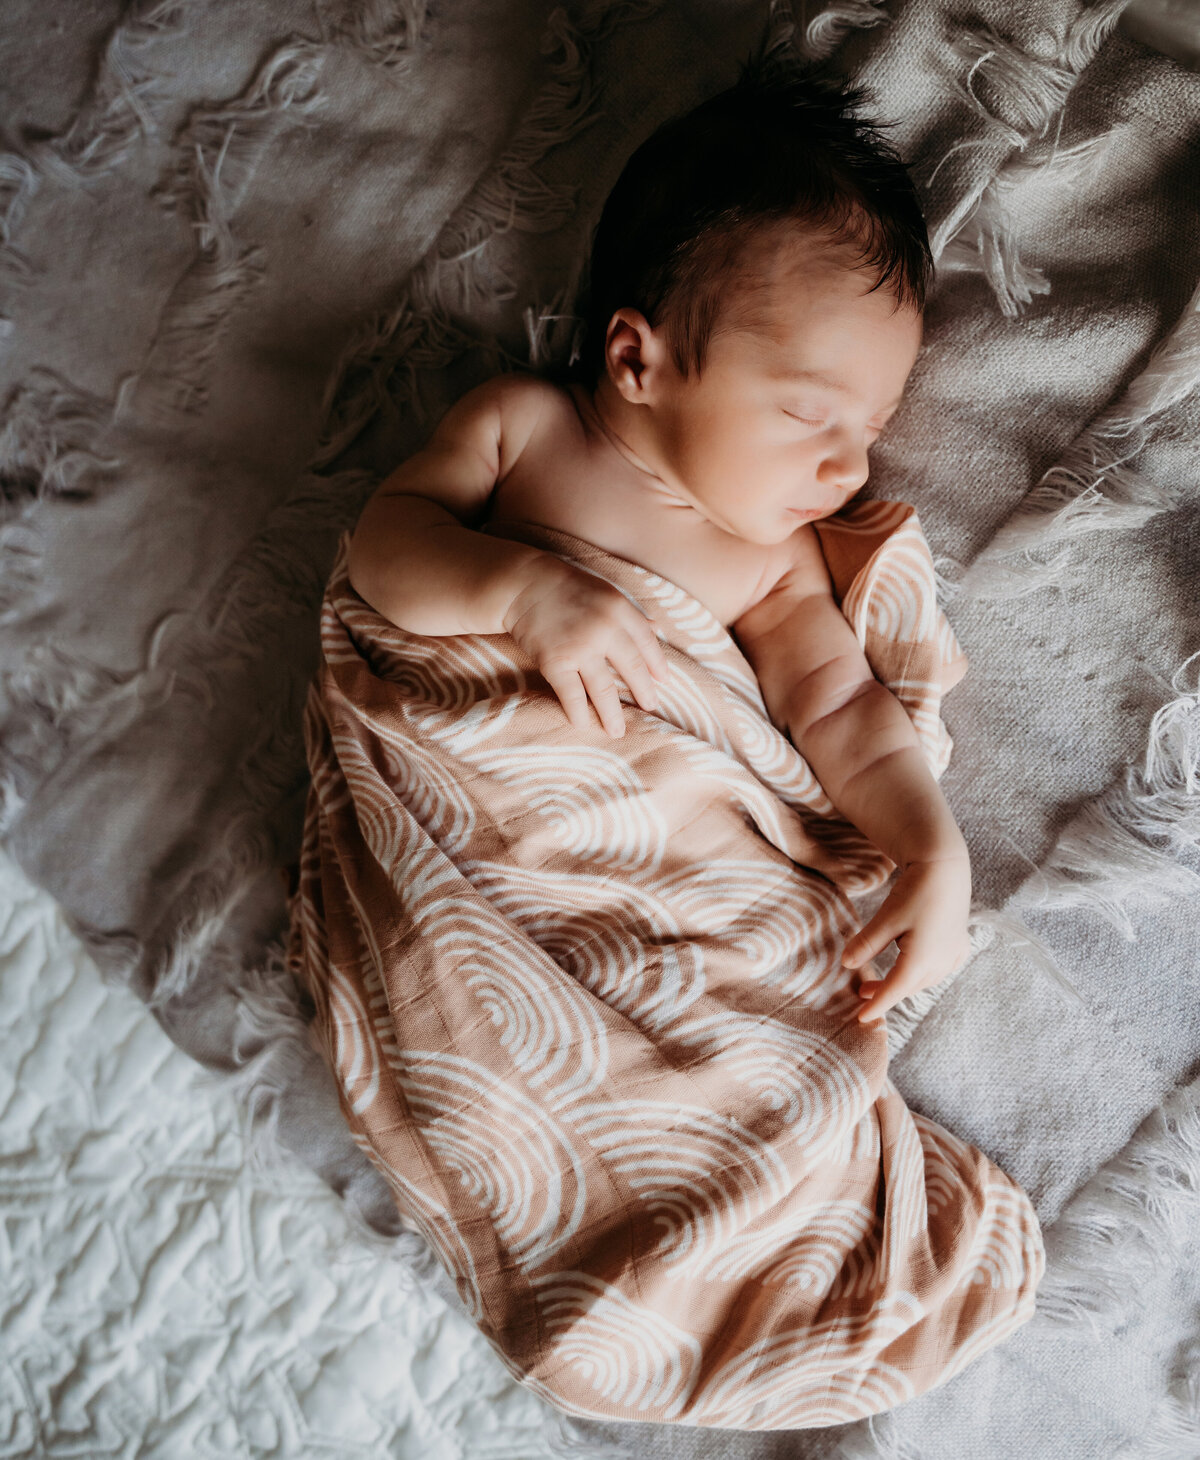 Newborn Photographer, a baby sleeps cozily wrapped in blankets on the bed covers